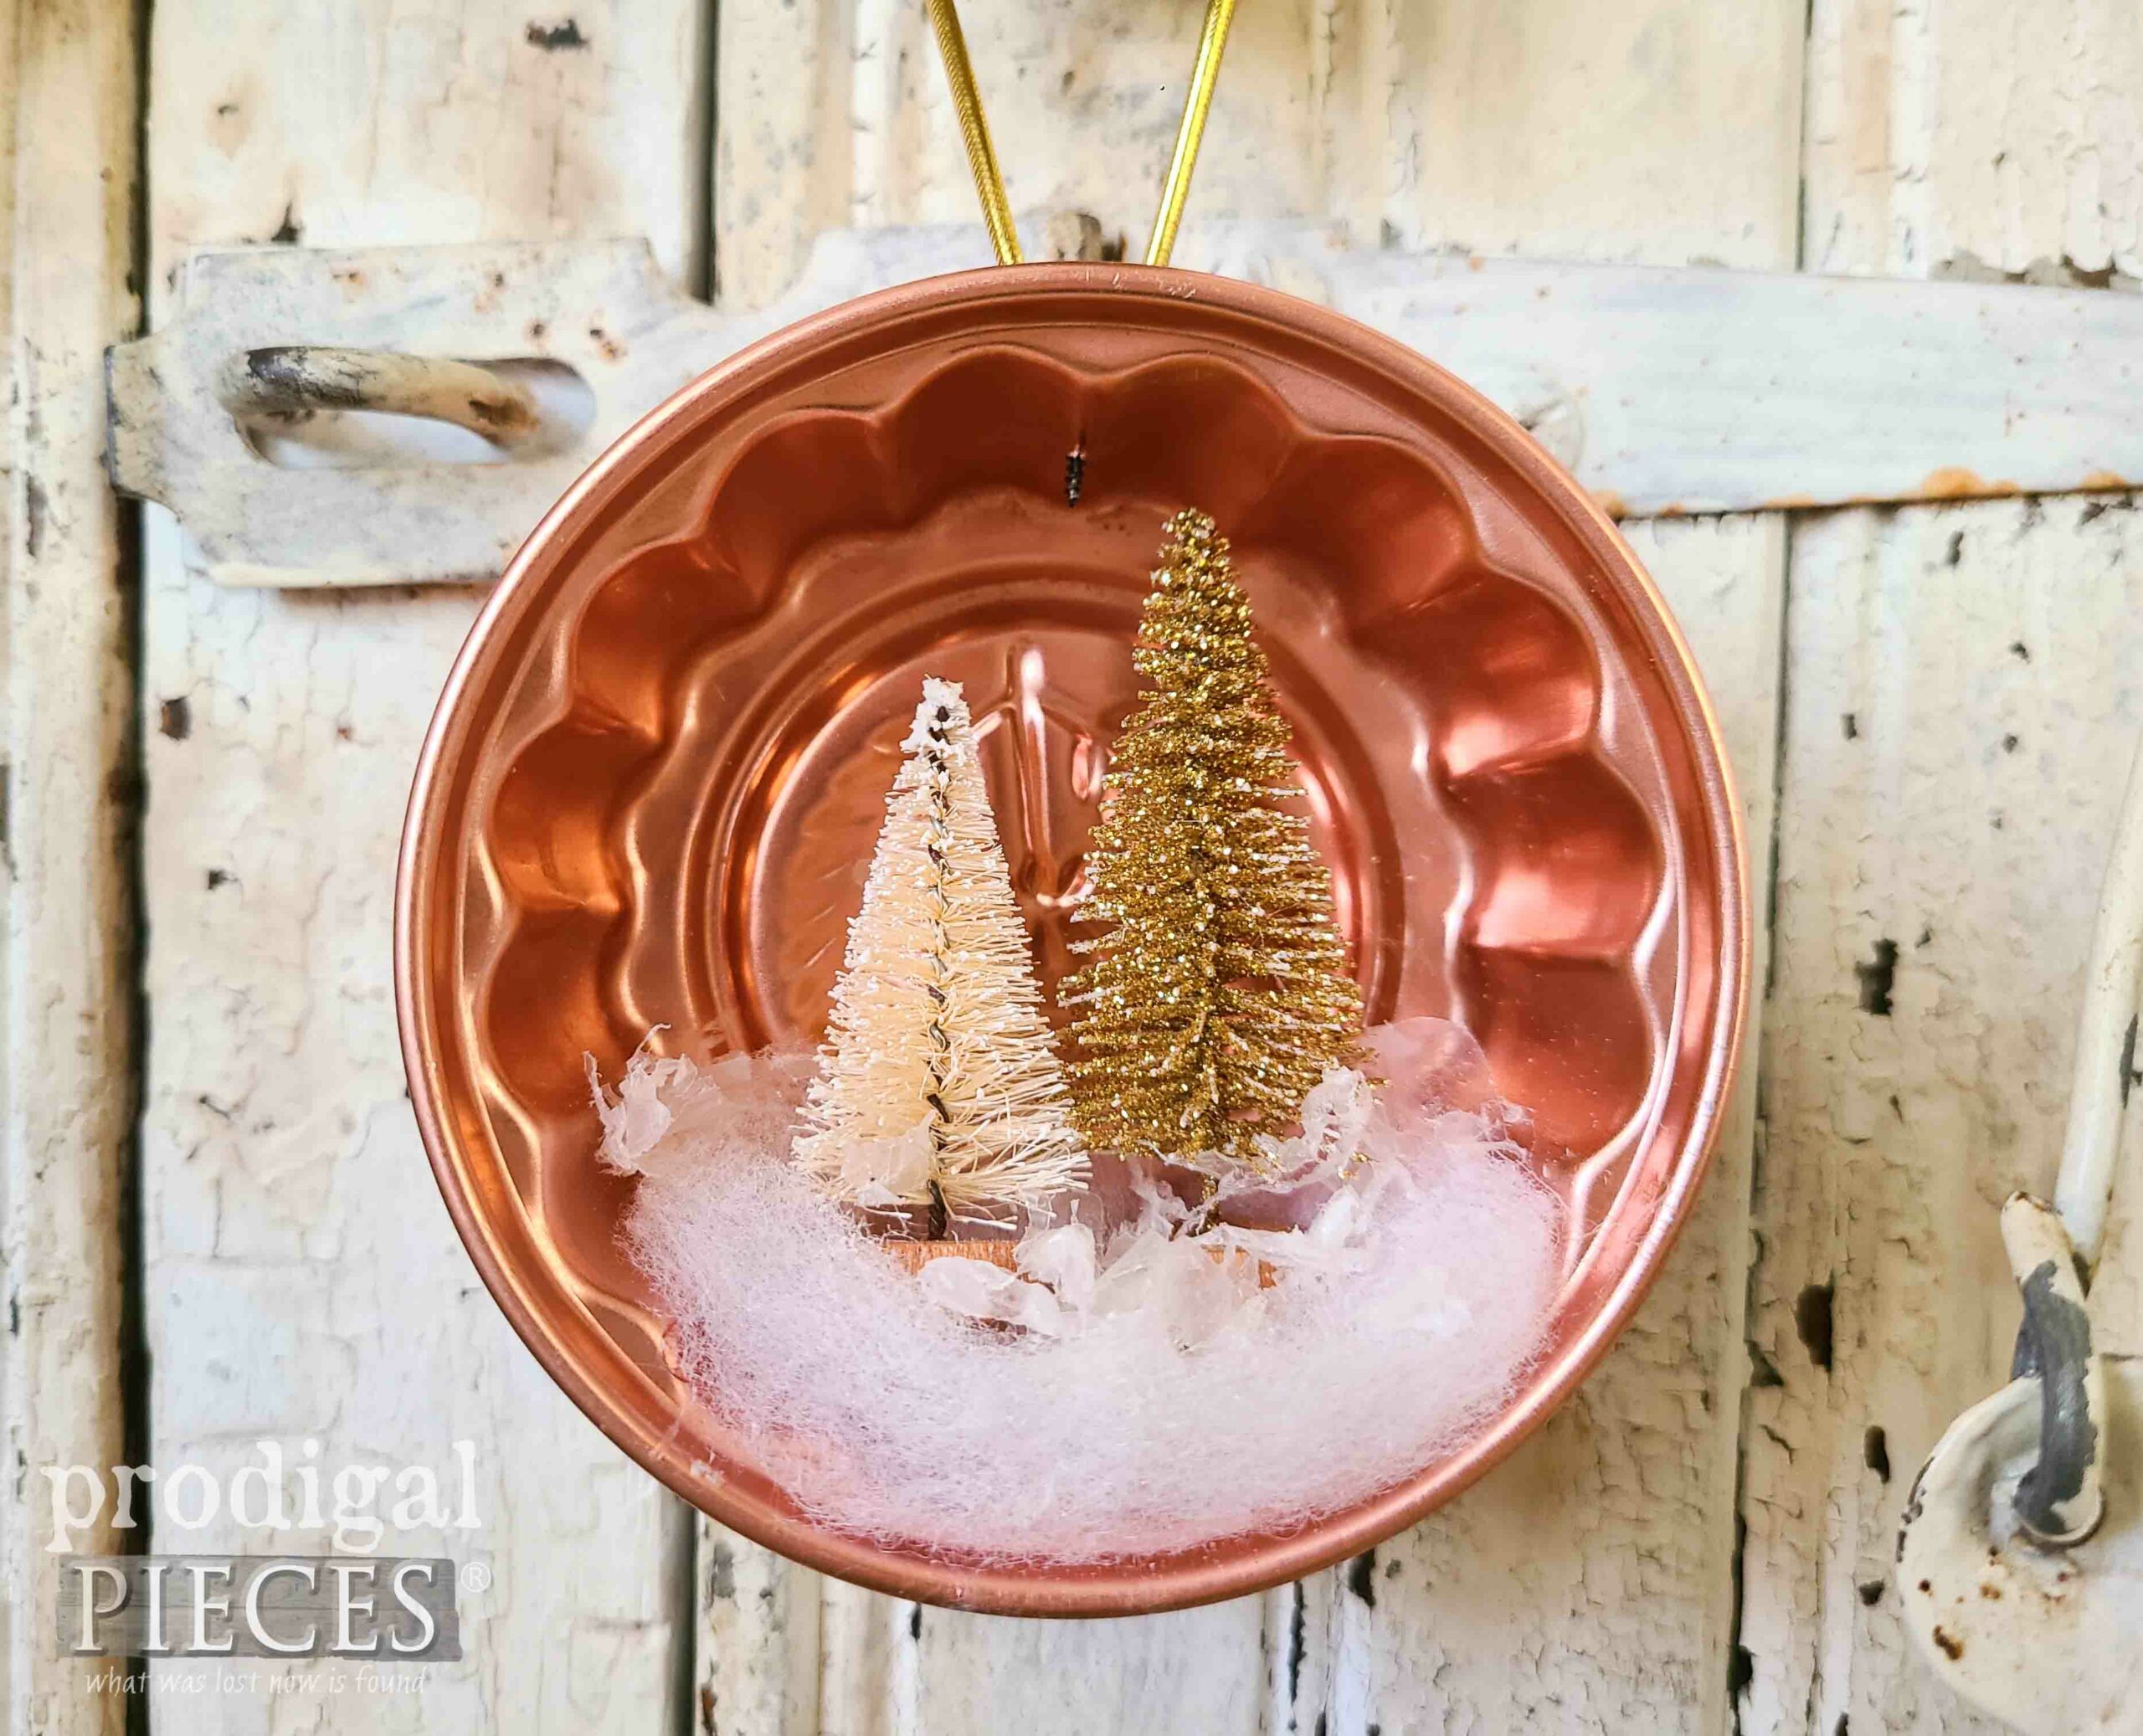 Repurposed Christmas Ornaments from Copper Jello Mold by Larissa of Prodigal Pieces | prodigalpieces.com #prodigalpieces #christmas #vintage